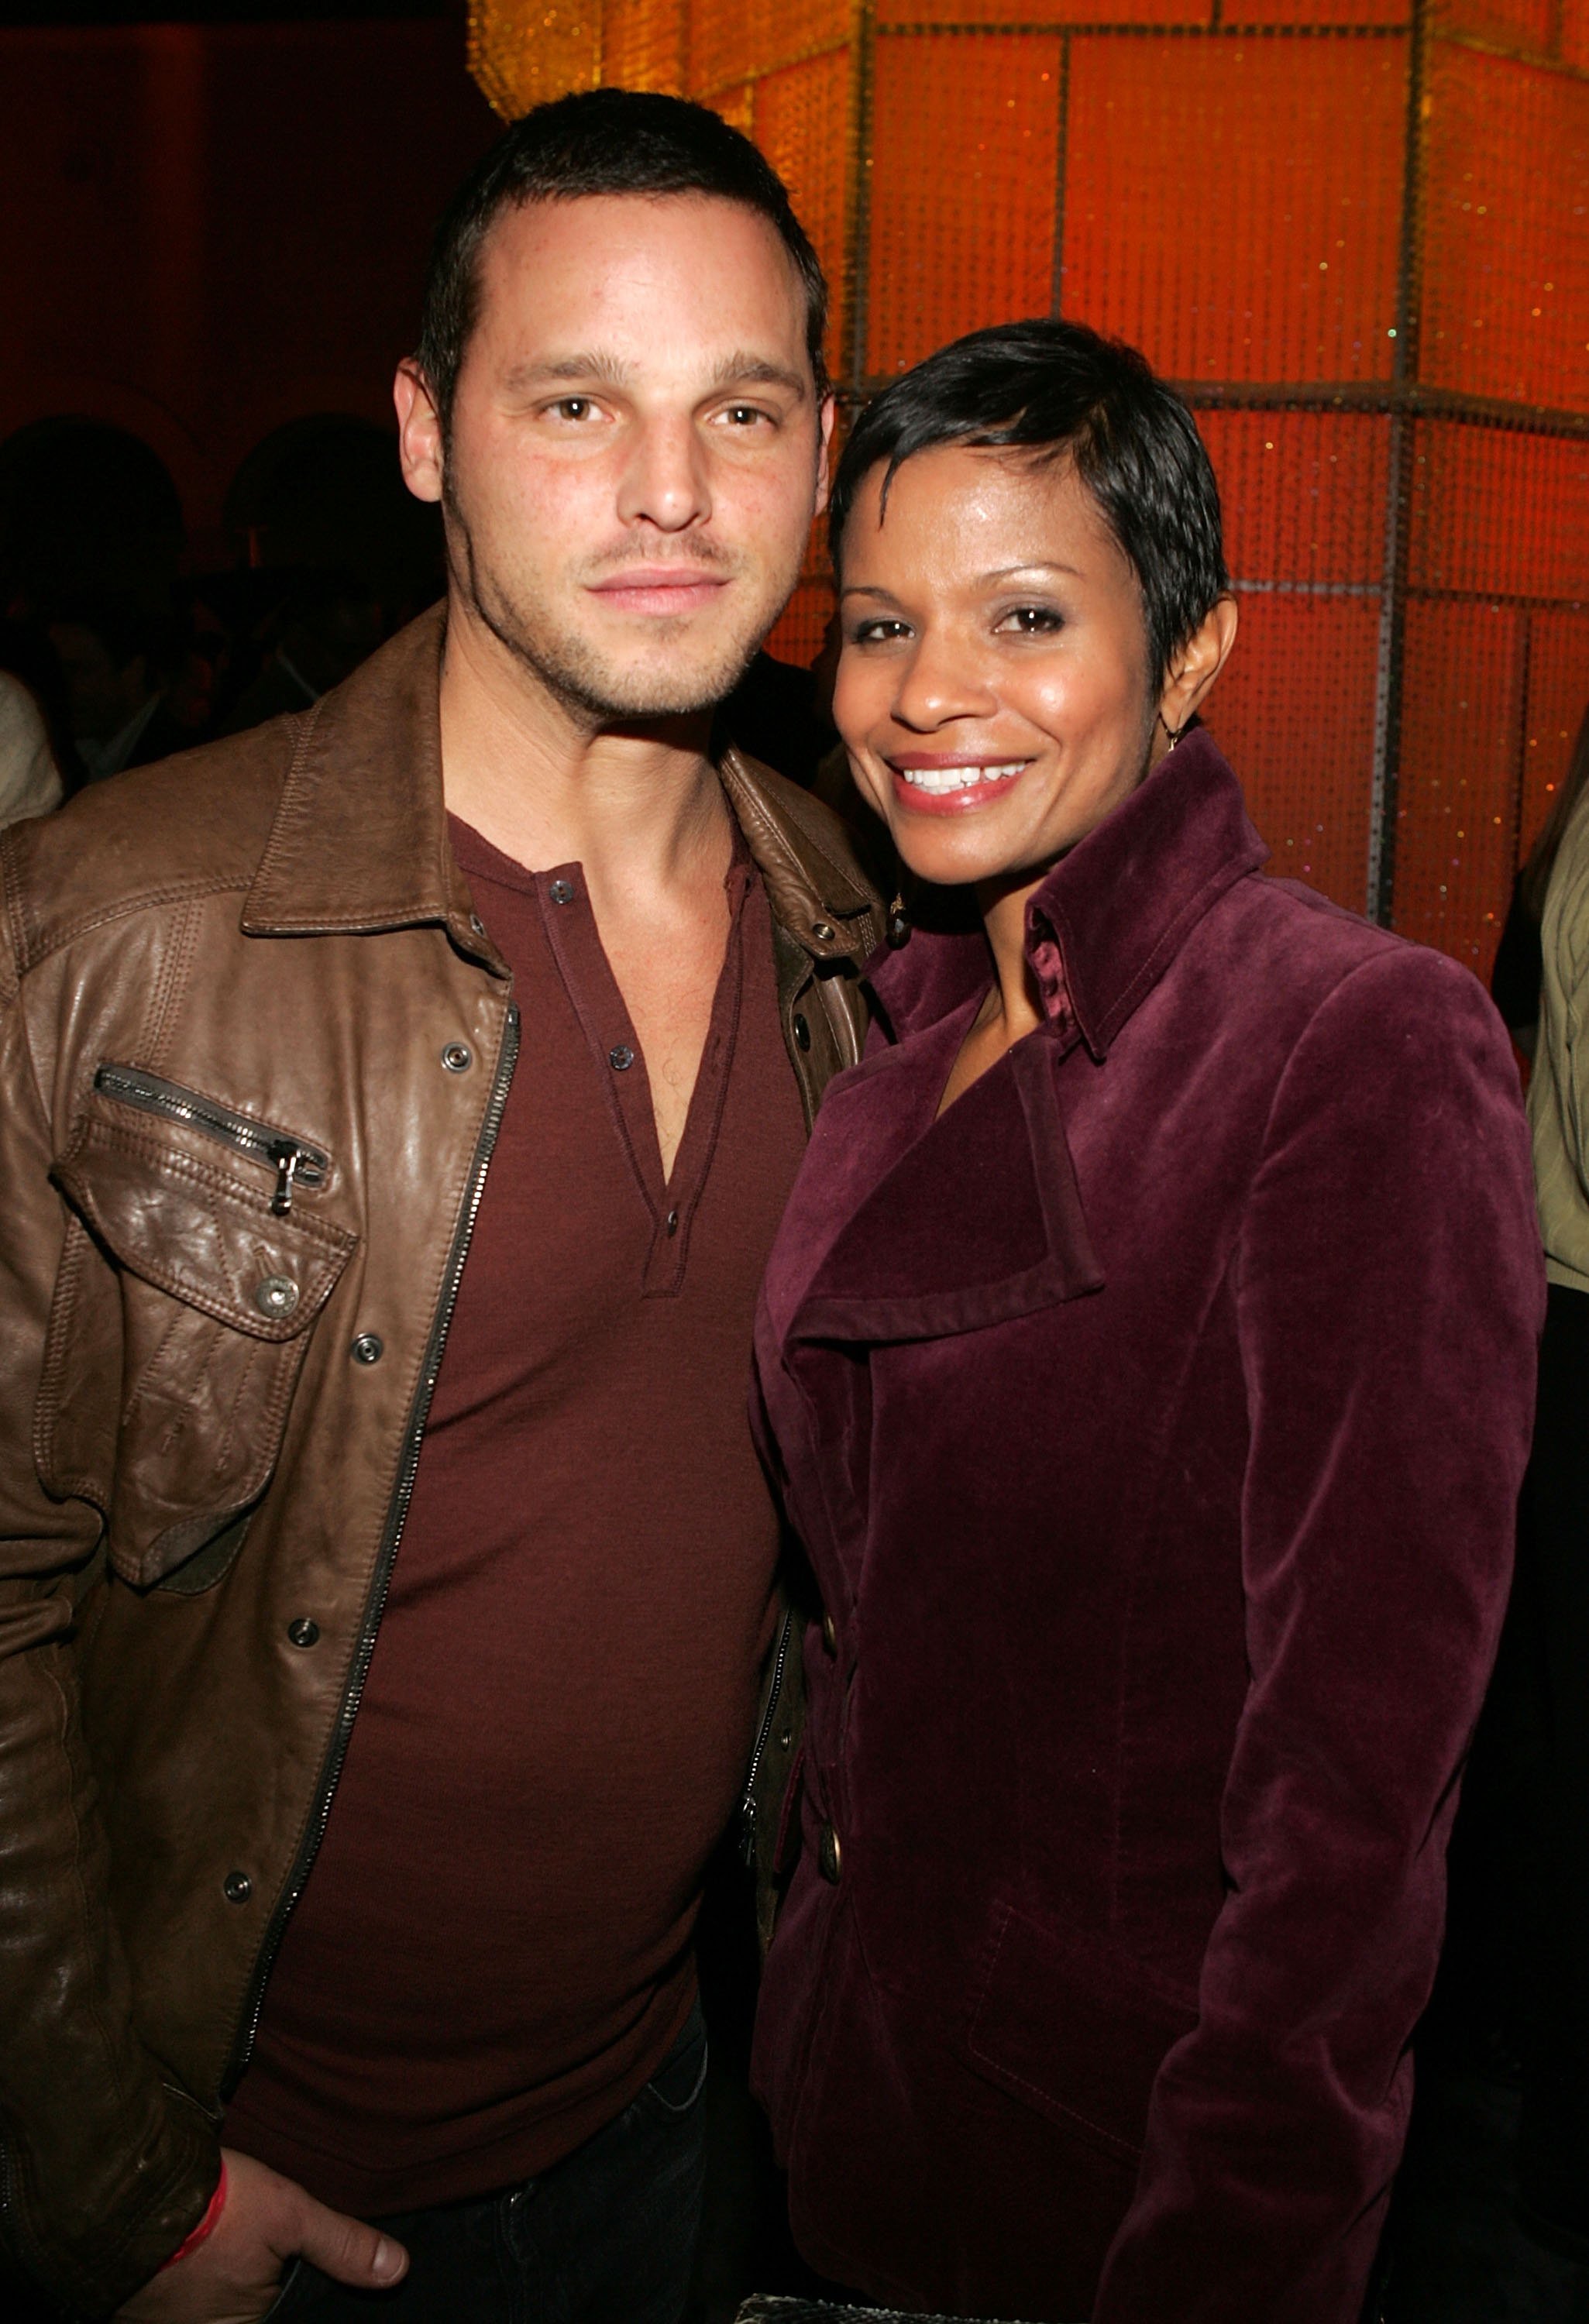  Actor Justin Chambers (L) and his wife Keisha attend the Victoria's Secret Fashion Show after party held at the Hollywood Roosevelt Hotel on November 16, 2006  | Source: Getty Images